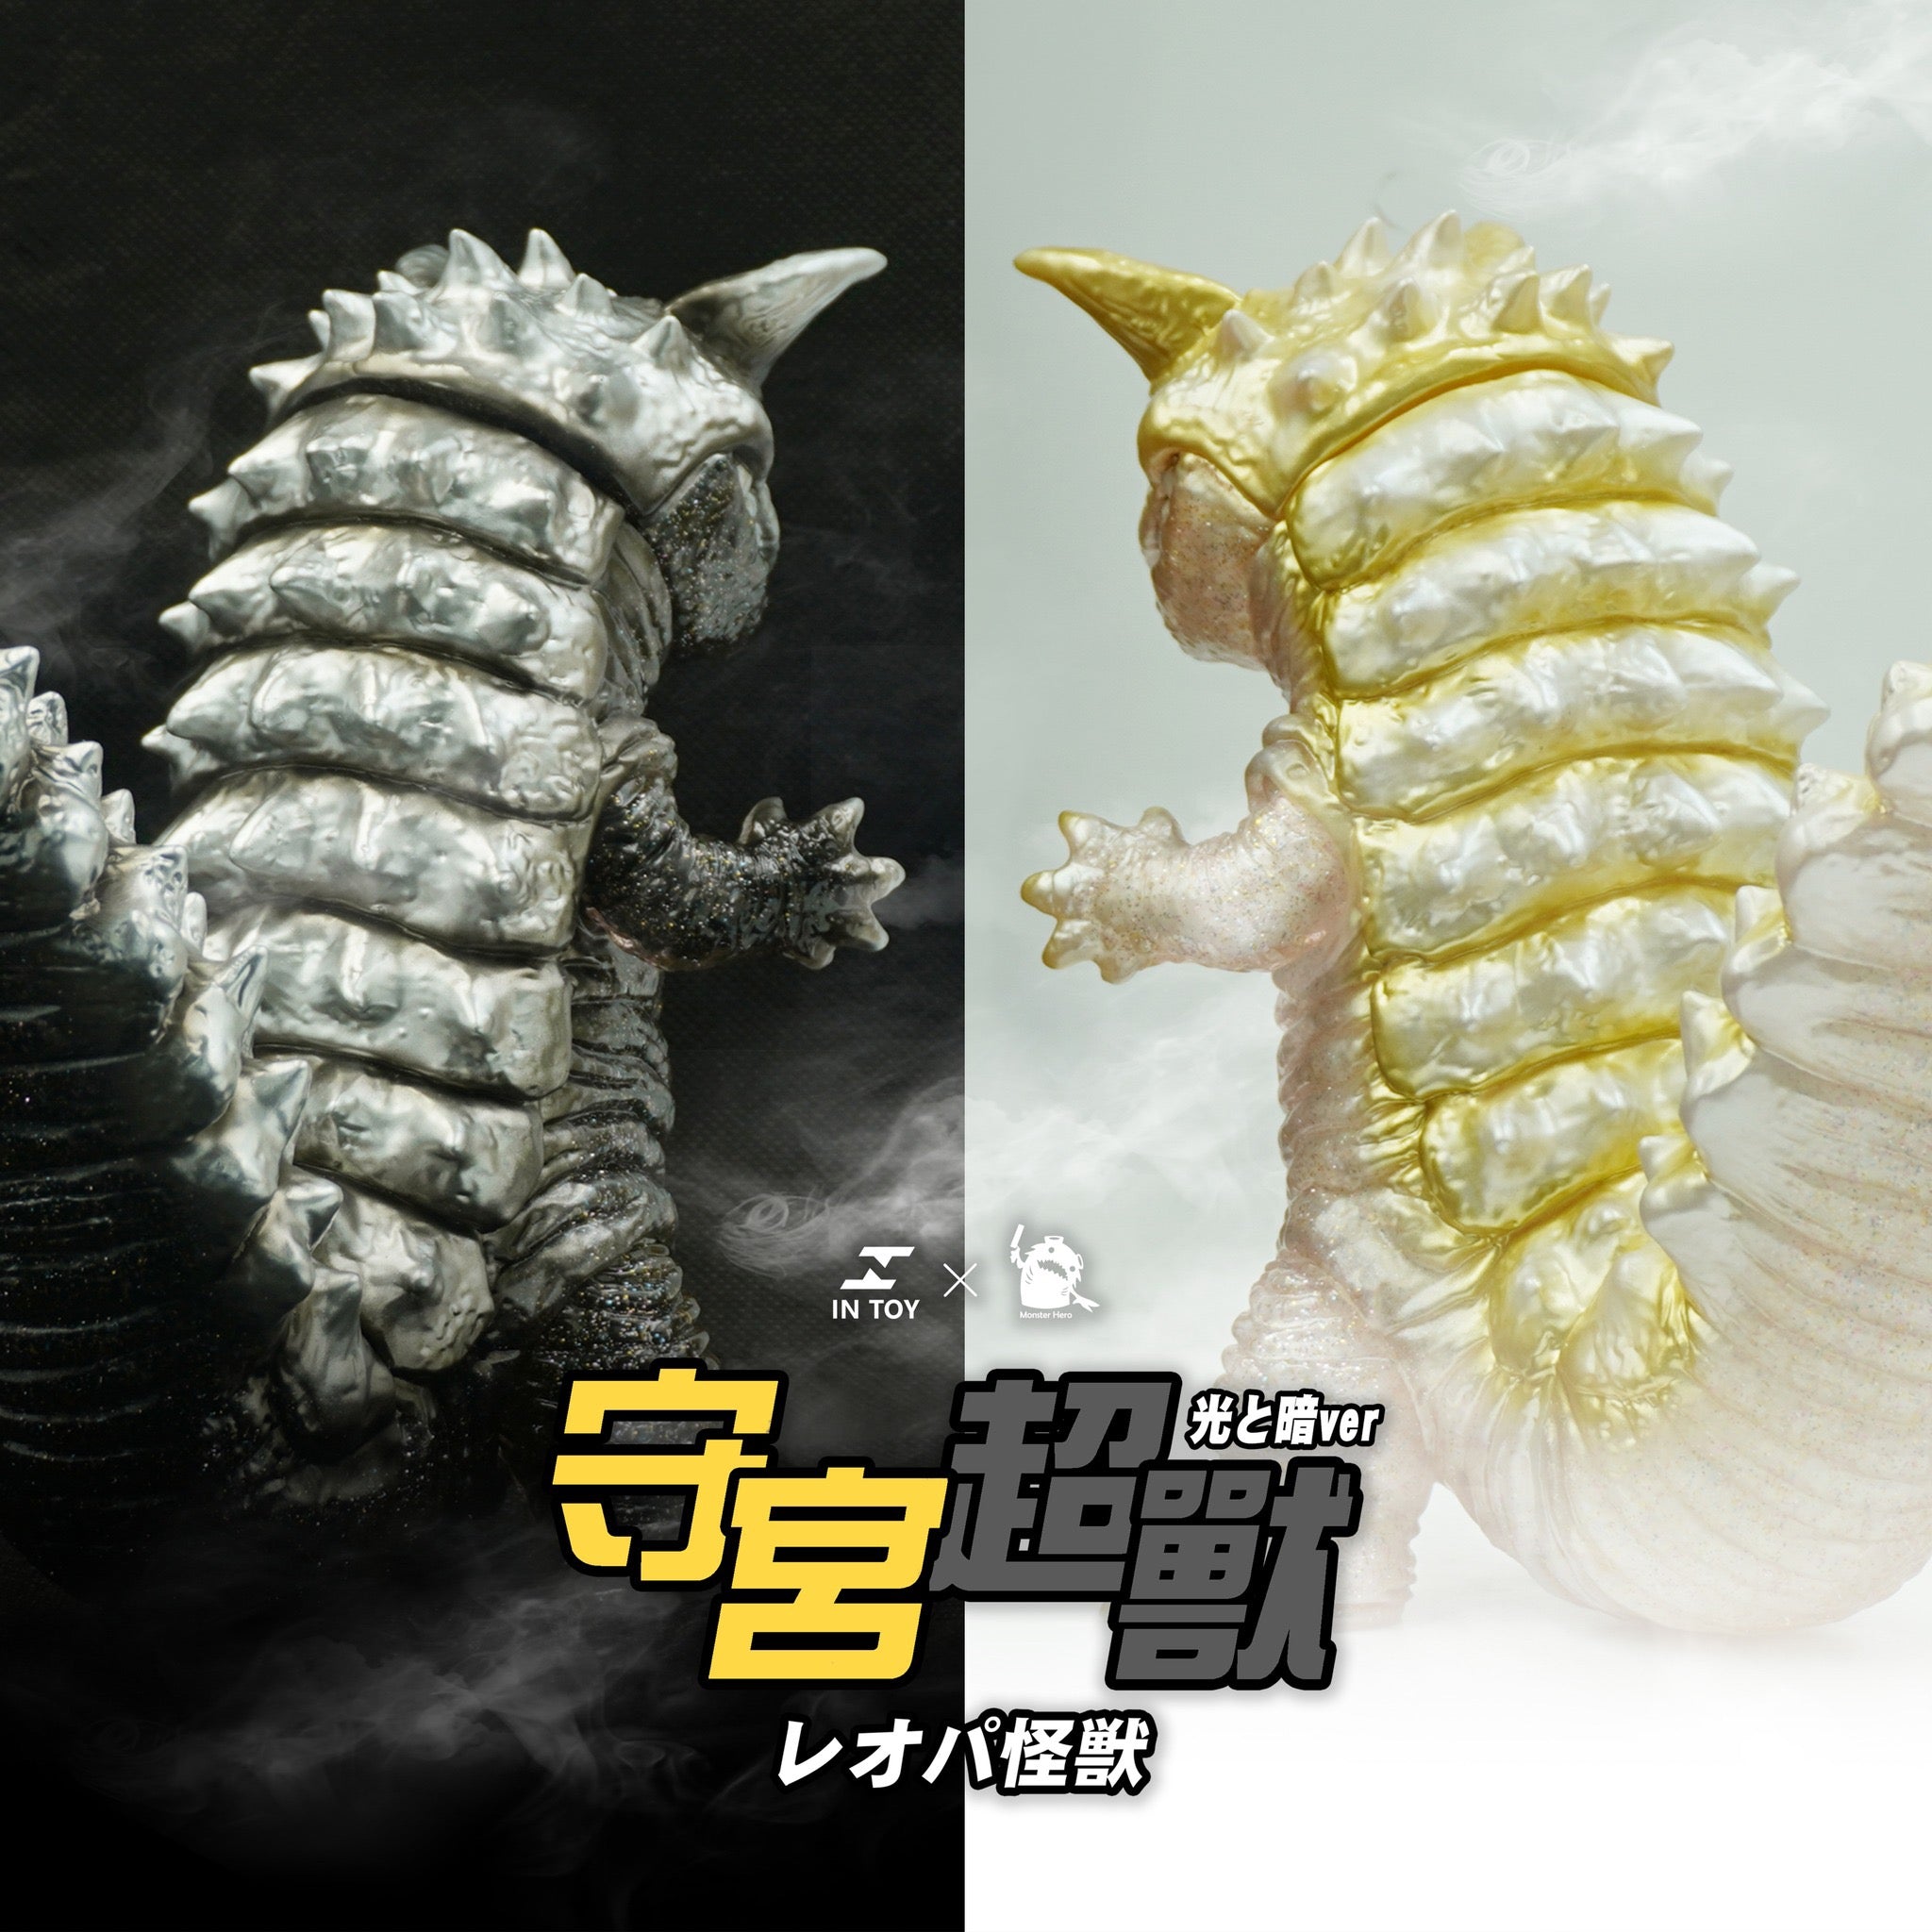 Gecko Super Beast - Light and dark .Ver by INTOY x Monster Hero